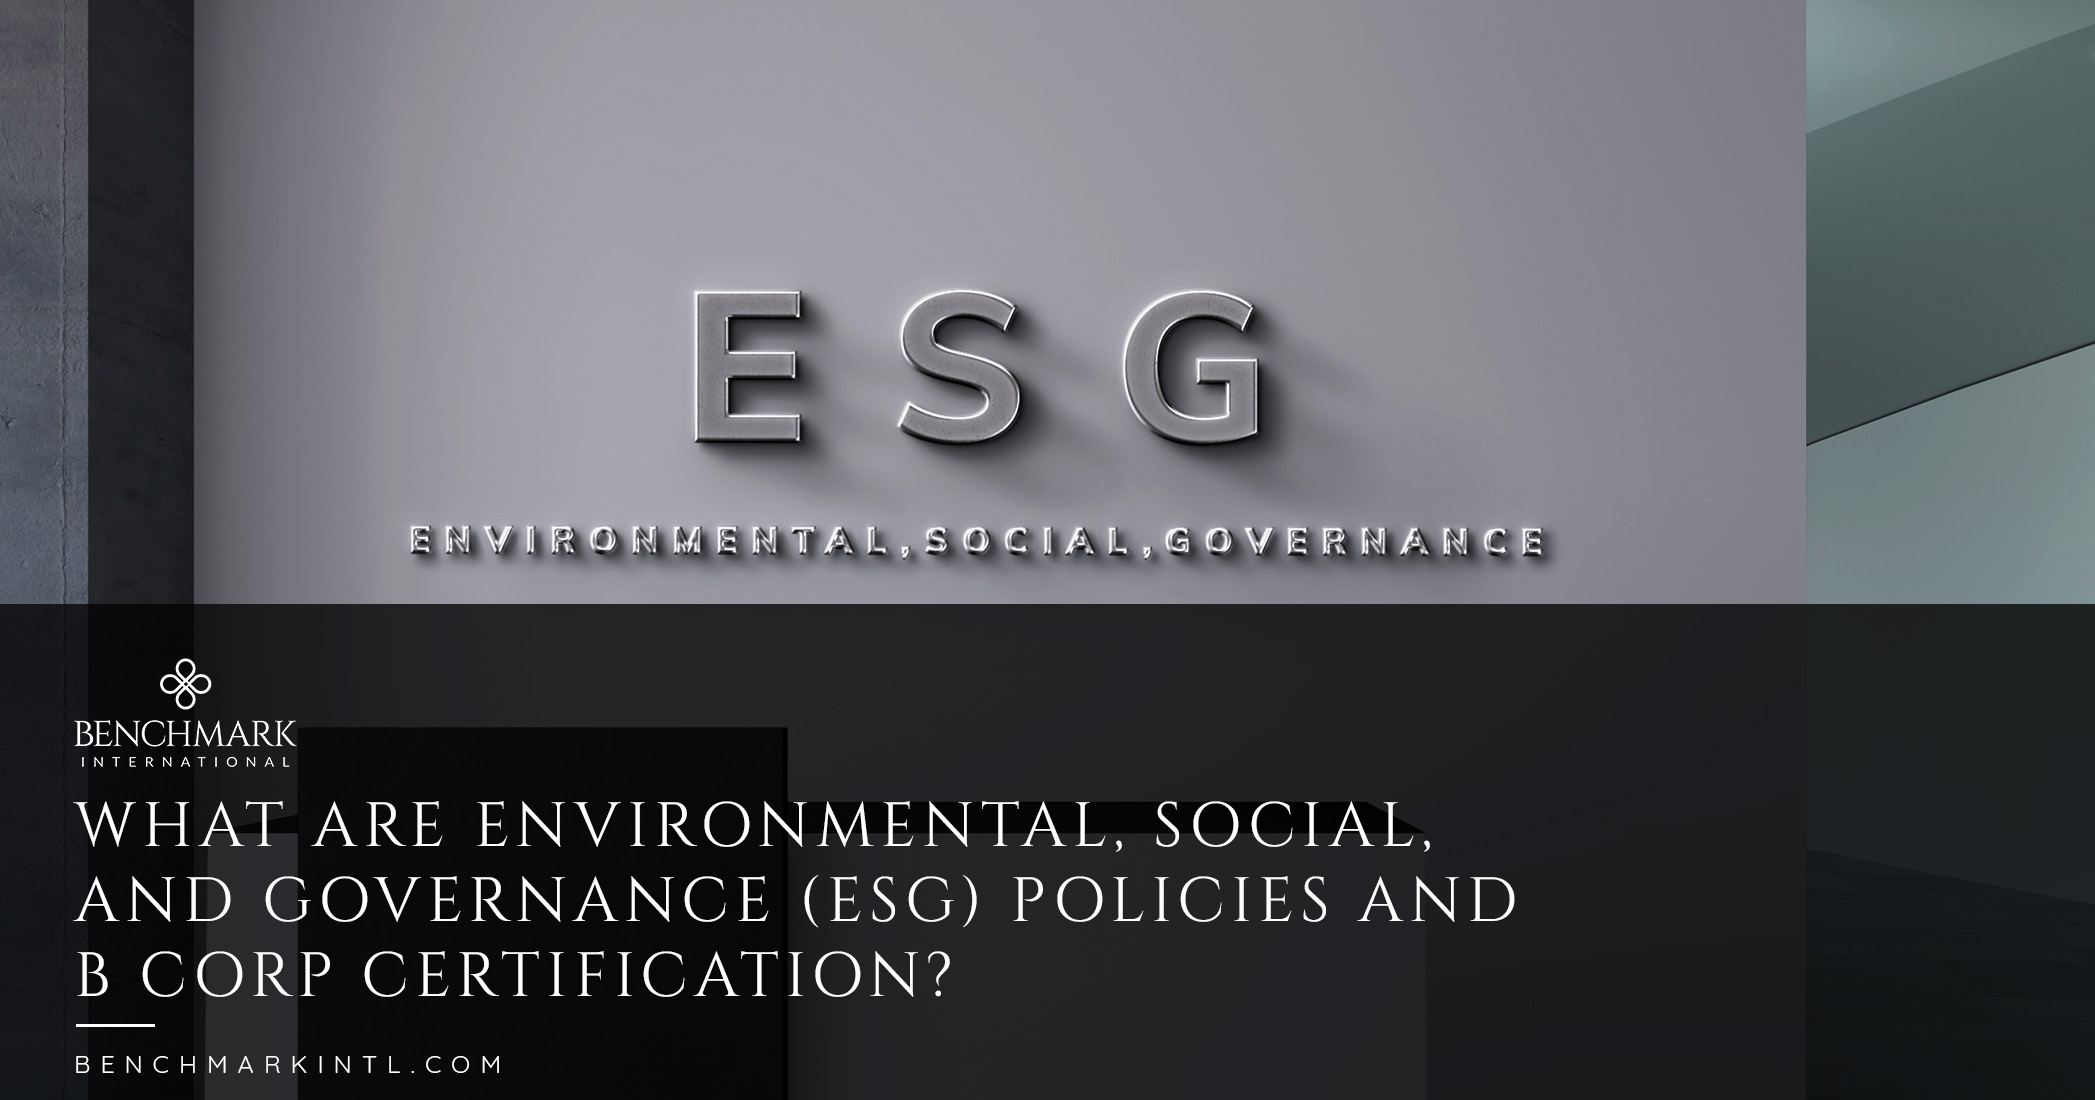 What Are Environmental, Social, And Governance (ESG) Policies And B Corp Certification?